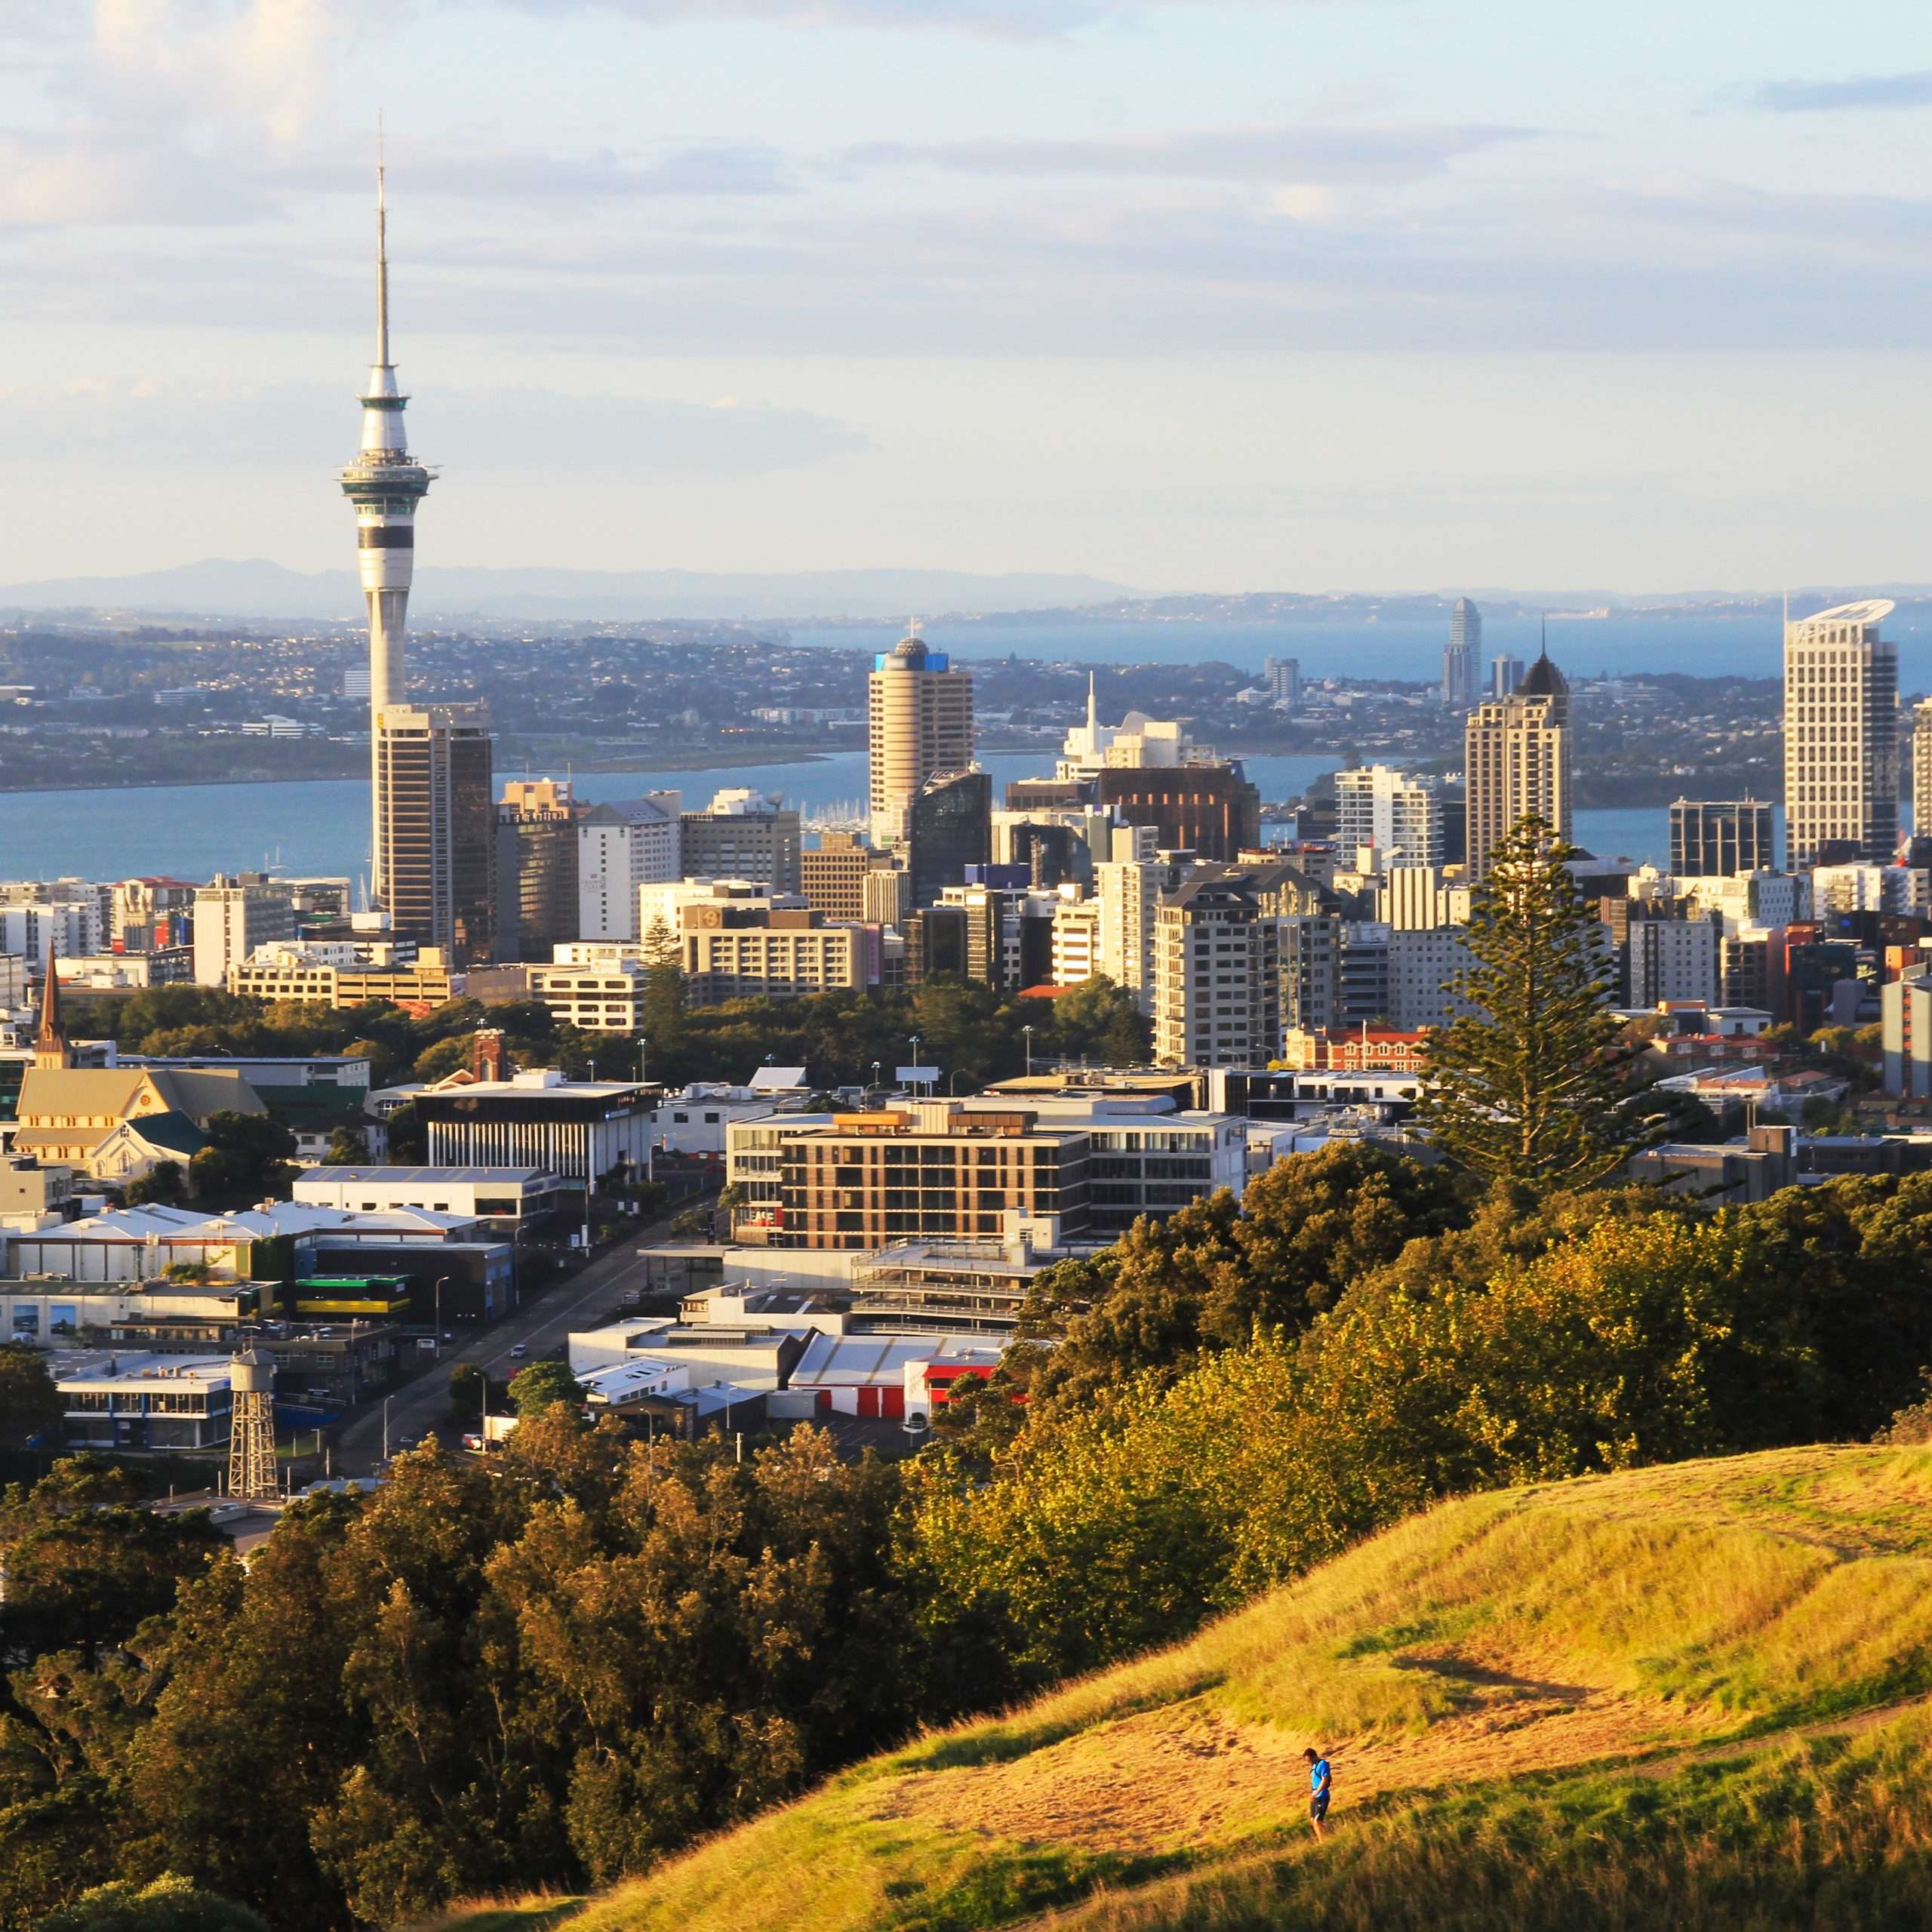 Day 05 - Auckland